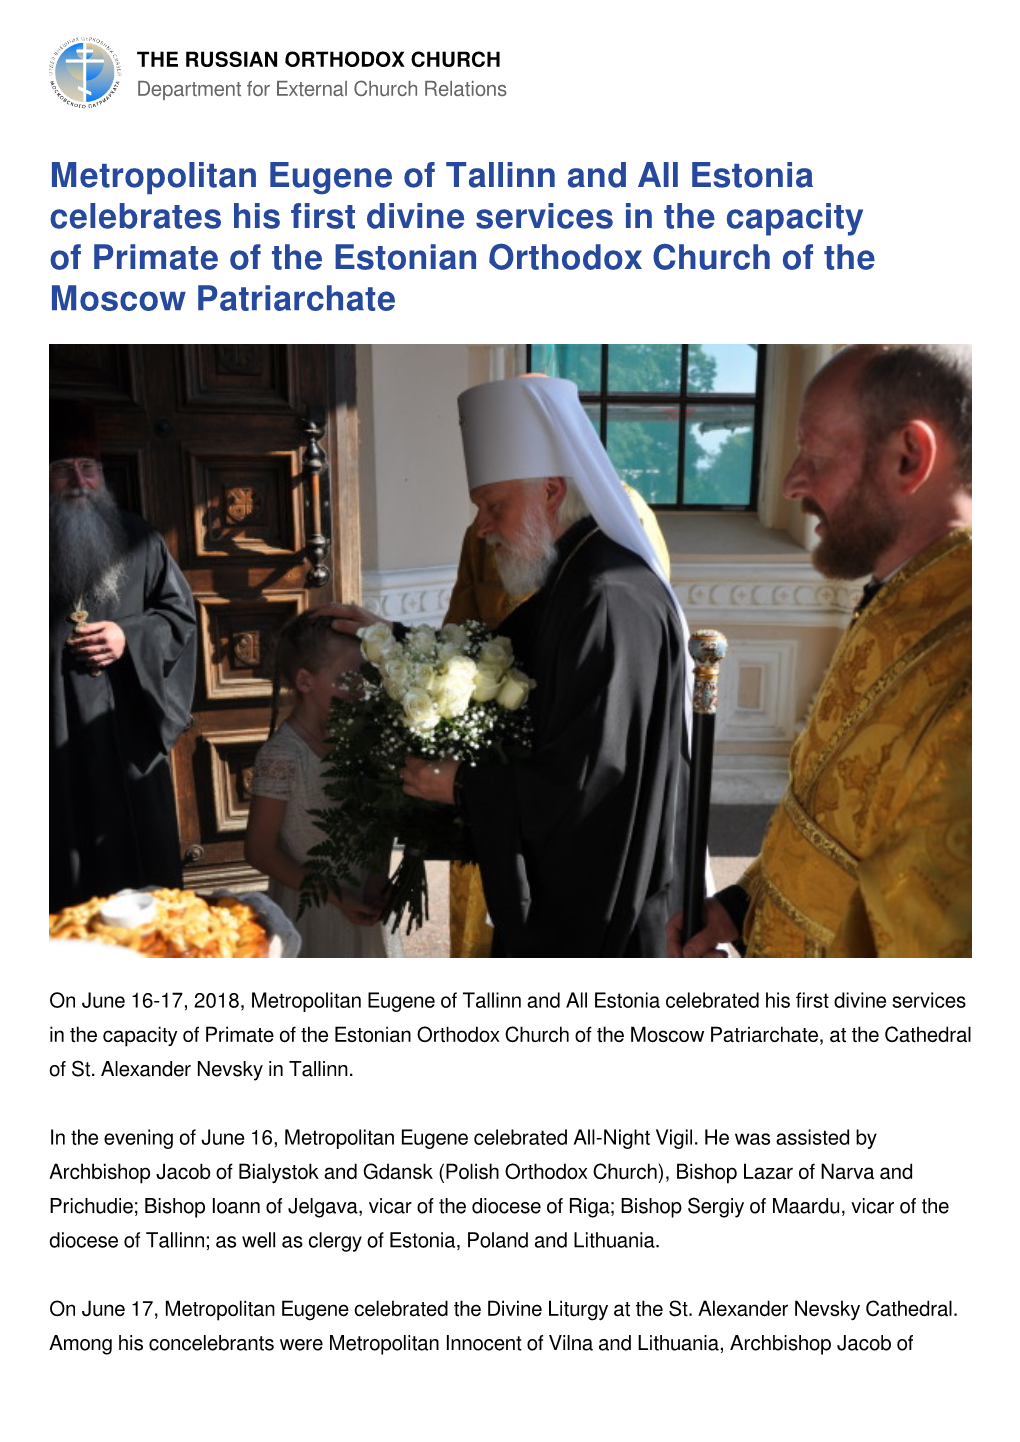 THE RUSSIAN ORTHODOX CHURCH Department for External Church Relations